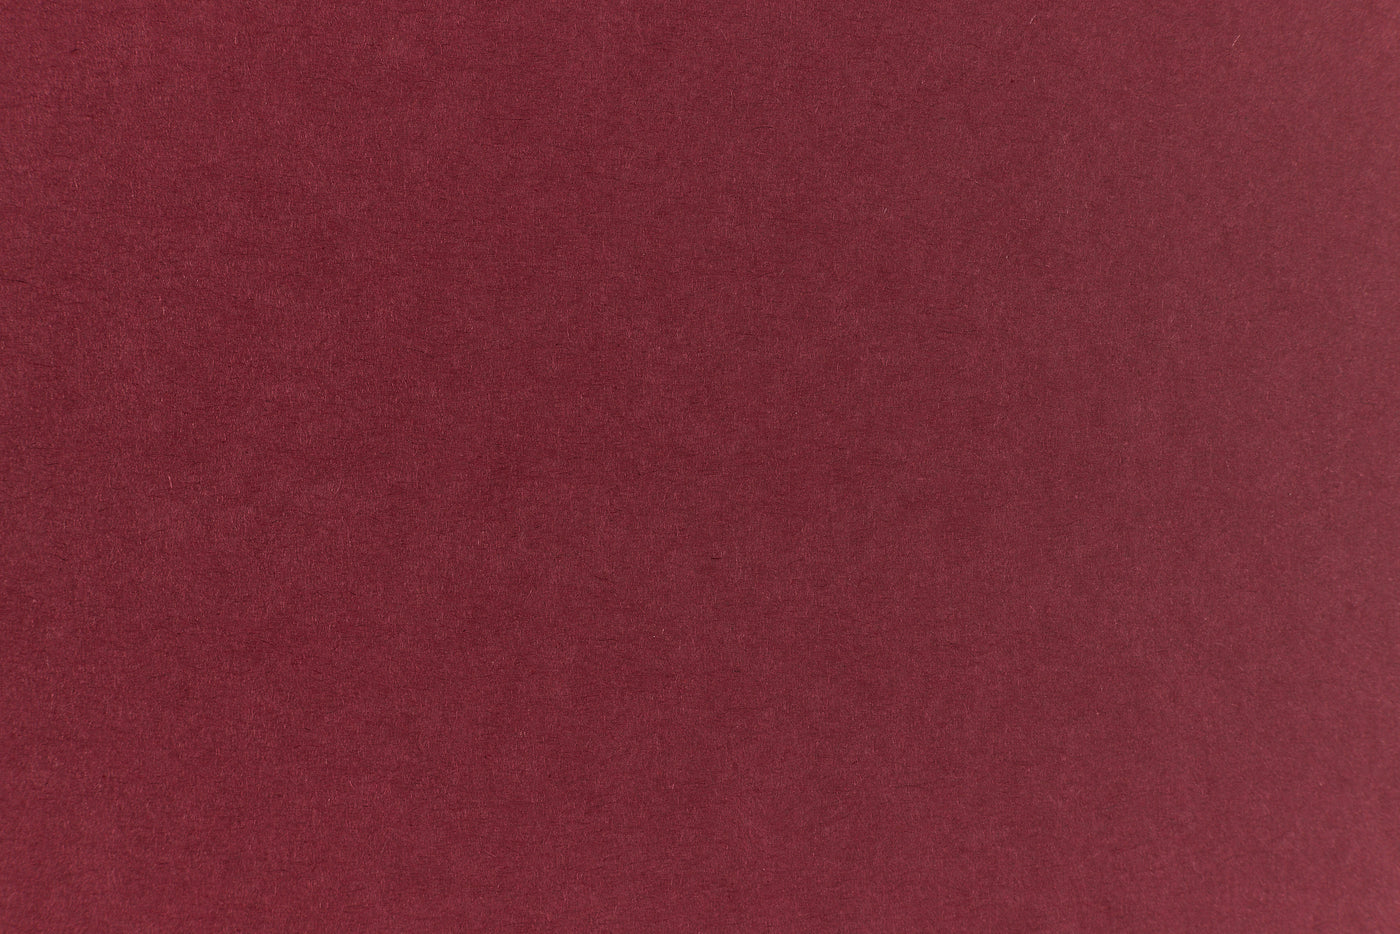 French Paper Construction Brick Red 80# Cover 8.5 x 11